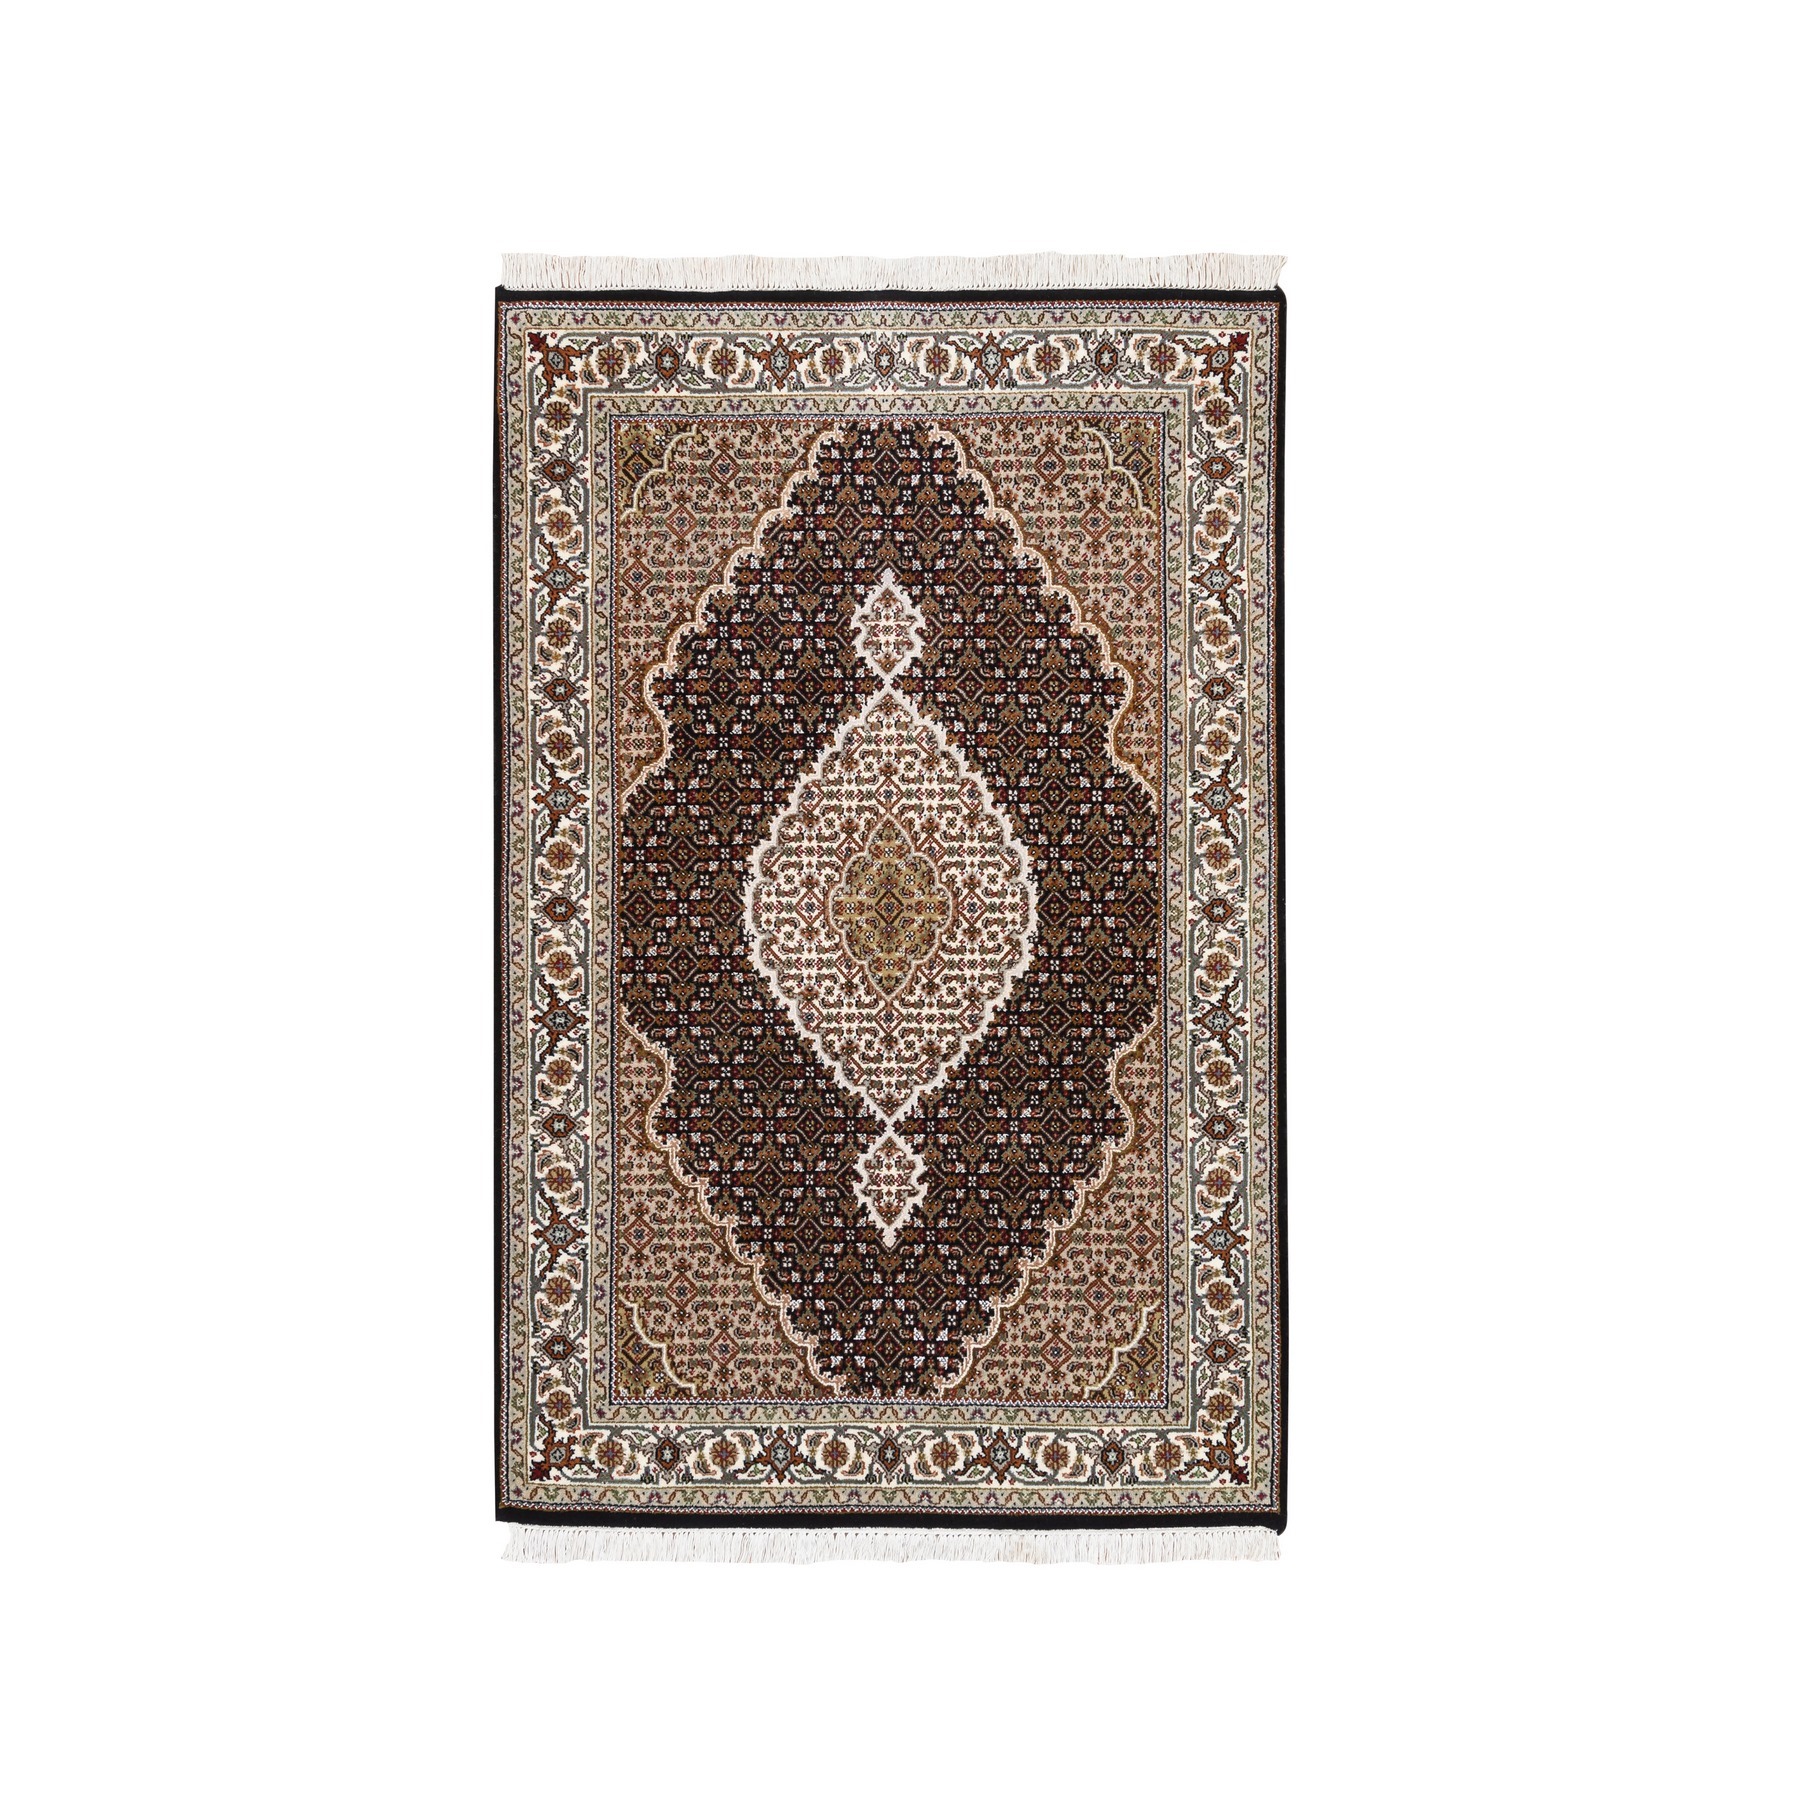 Pirniakan Collection Hand Knotted Black Rug No: 1124976